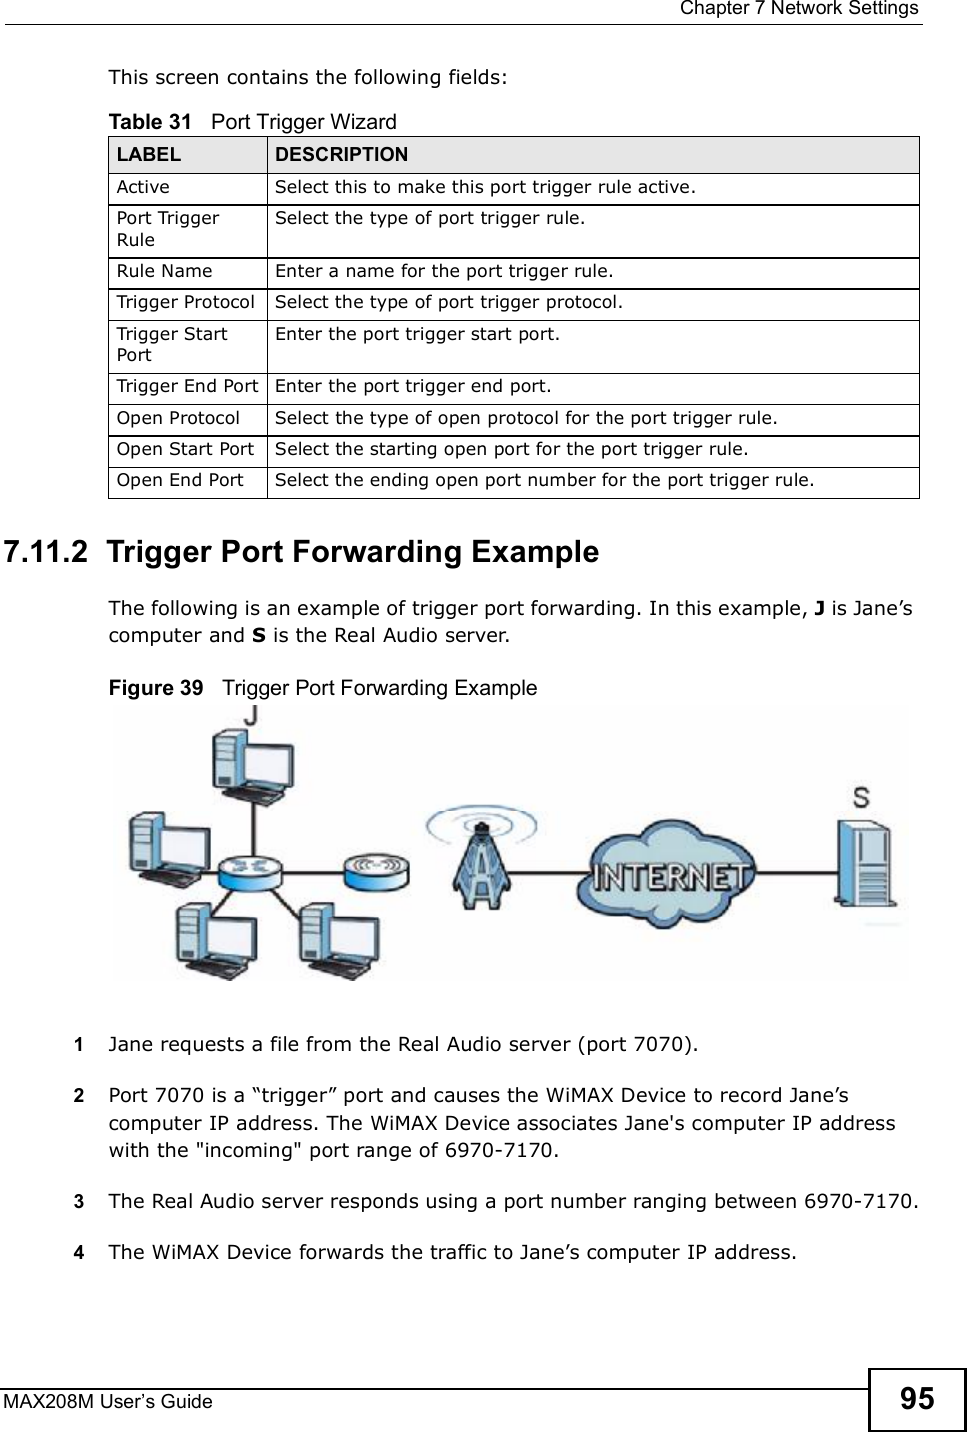  Chapter 7Network SettingsMAX208M User s Guide 95This screen contains the following fields:7.11.2  Trigger Port Forwarding ExampleThe following is an example of trigger port forwarding. In this example, J is Jane s computer and S is the Real Audio server.Figure 39   Trigger Port Forwarding Example1Jane requests a file from the Real Audio server (port 7070).2Port 7070 is a &quot;trigger# port and causes the WiMAX Device to record Jane s computer IP address. The WiMAX Device associates Jane&apos;s computer IP address with the &quot;incoming&quot; port range of 6970-7170.3The Real Audio server responds using a port number ranging between 6970-7170.4The WiMAX Device forwards the traffic to Jane s computer IP address. Table 31   Port Trigger WizardLABEL DESCRIPTIONActiveSelect this to make this port trigger rule active.Port Trigger RuleSelect the type of port trigger rule.Rule NameEnter a name for the port trigger rule.Trigger ProtocolSelect the type of port trigger protocol.Trigger Start PortEnter the port trigger start port.Trigger End PortEnter the port trigger end port.Open ProtocolSelect the type of open protocol for the port trigger rule.Open Start PortSelect the starting open port for the port trigger rule.Open End PortSelect the ending open port number for the port trigger rule.